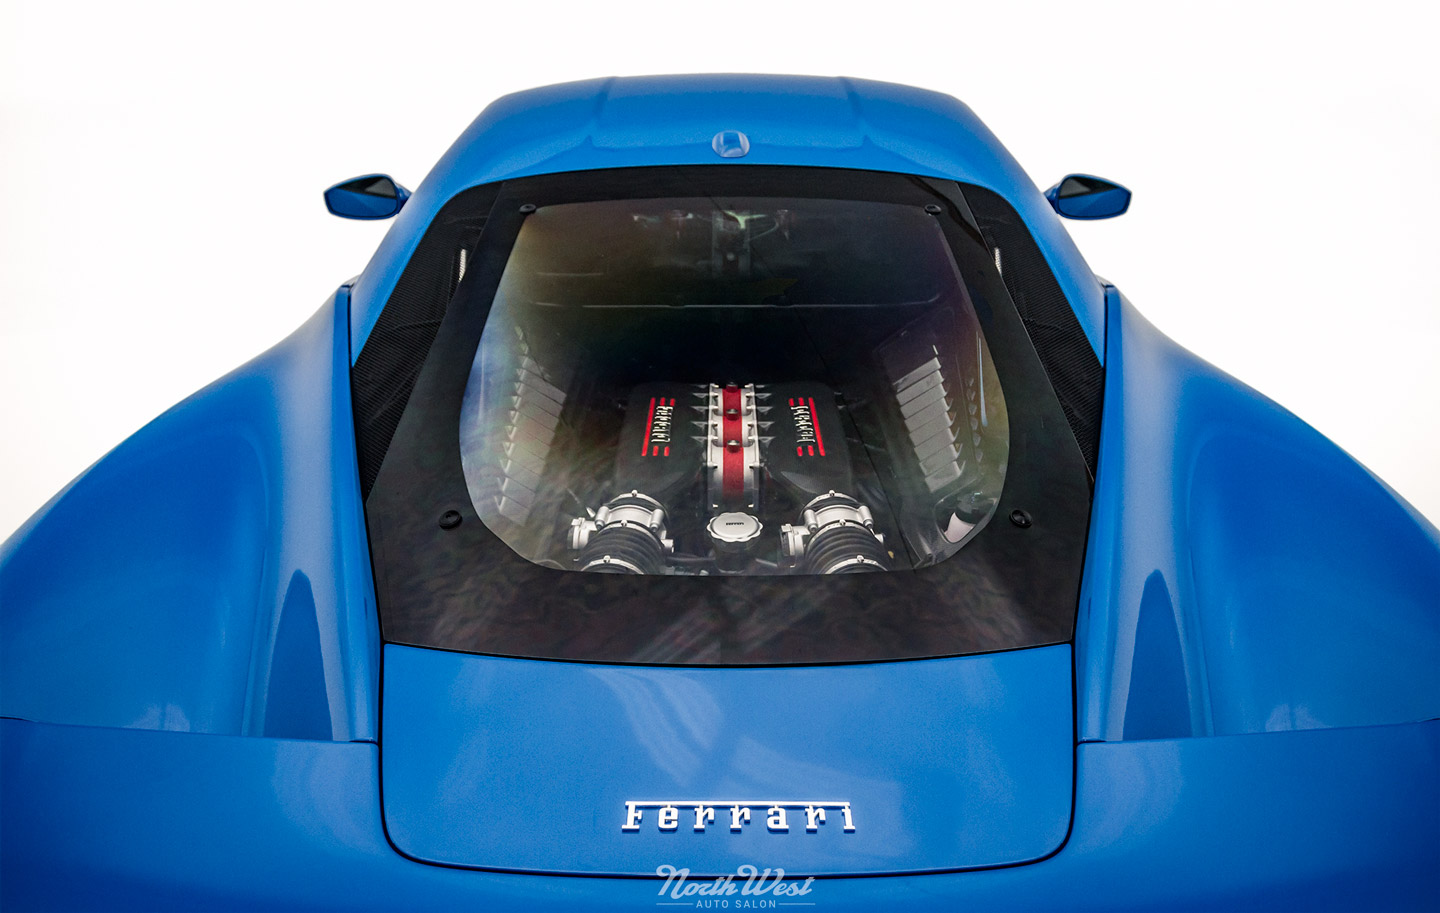 Azzurro-Dino-Ferrari-458-Speciale-XPEL-Ultimate-paint-protection-engine-bay-s